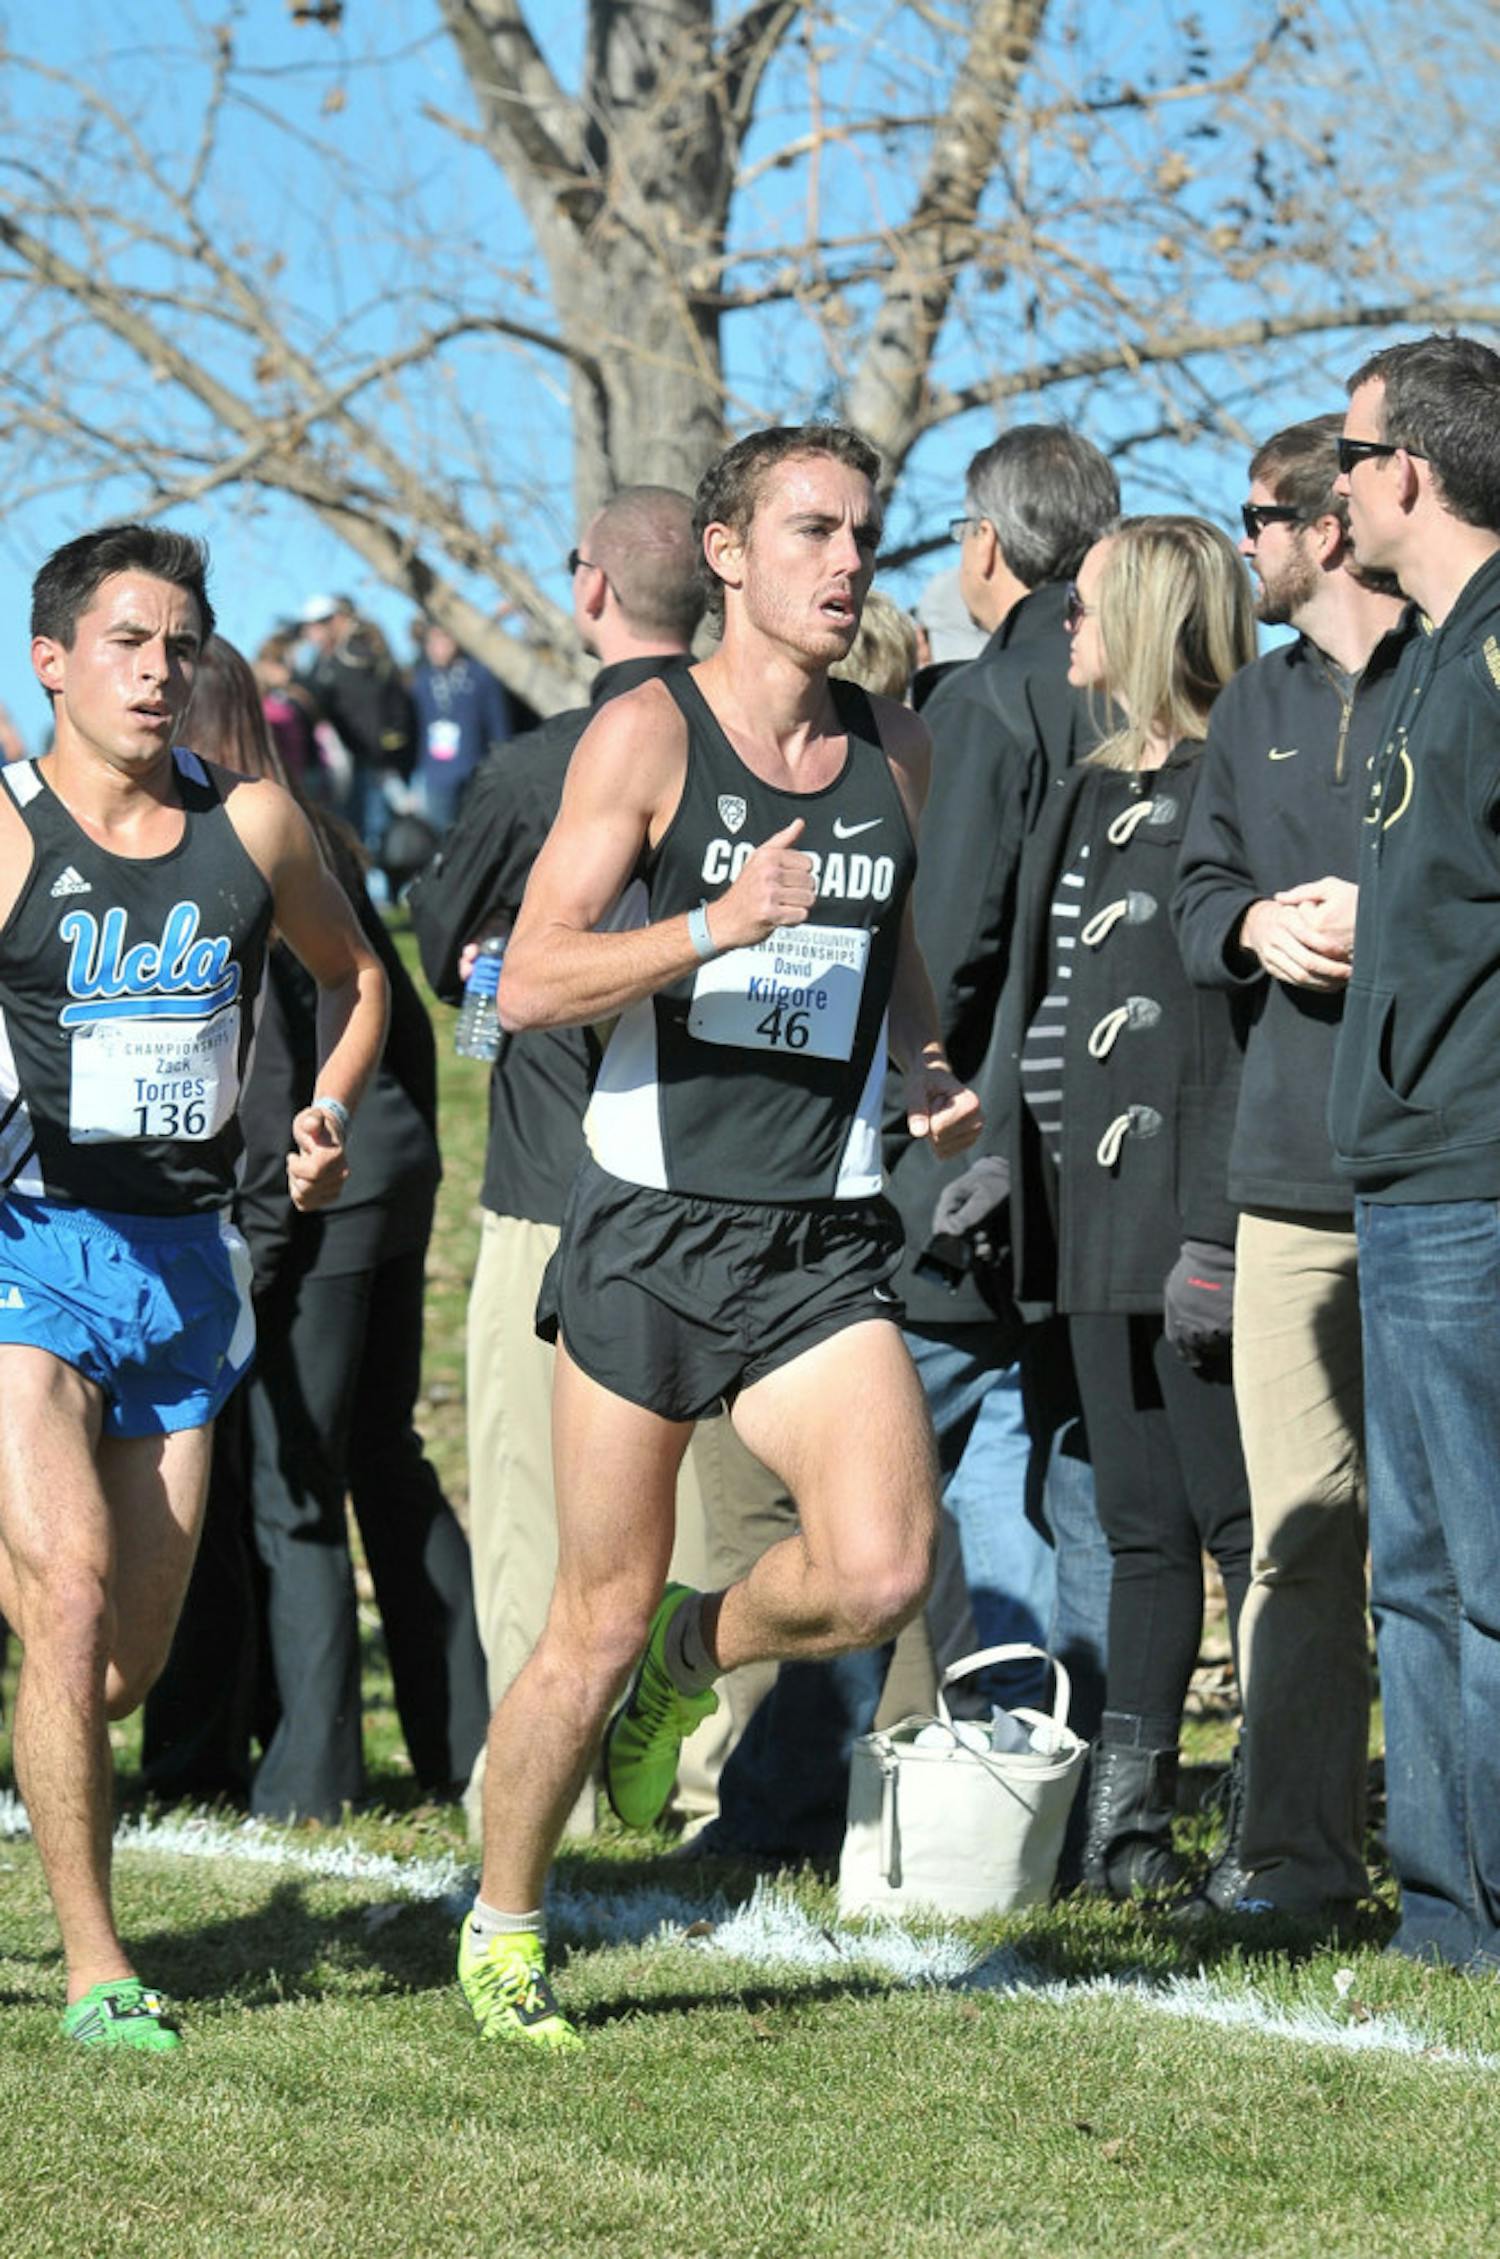 David Kilgore races in the 2013 Pac-12 Cross Country Cahmpionships in Louisville, Colo.